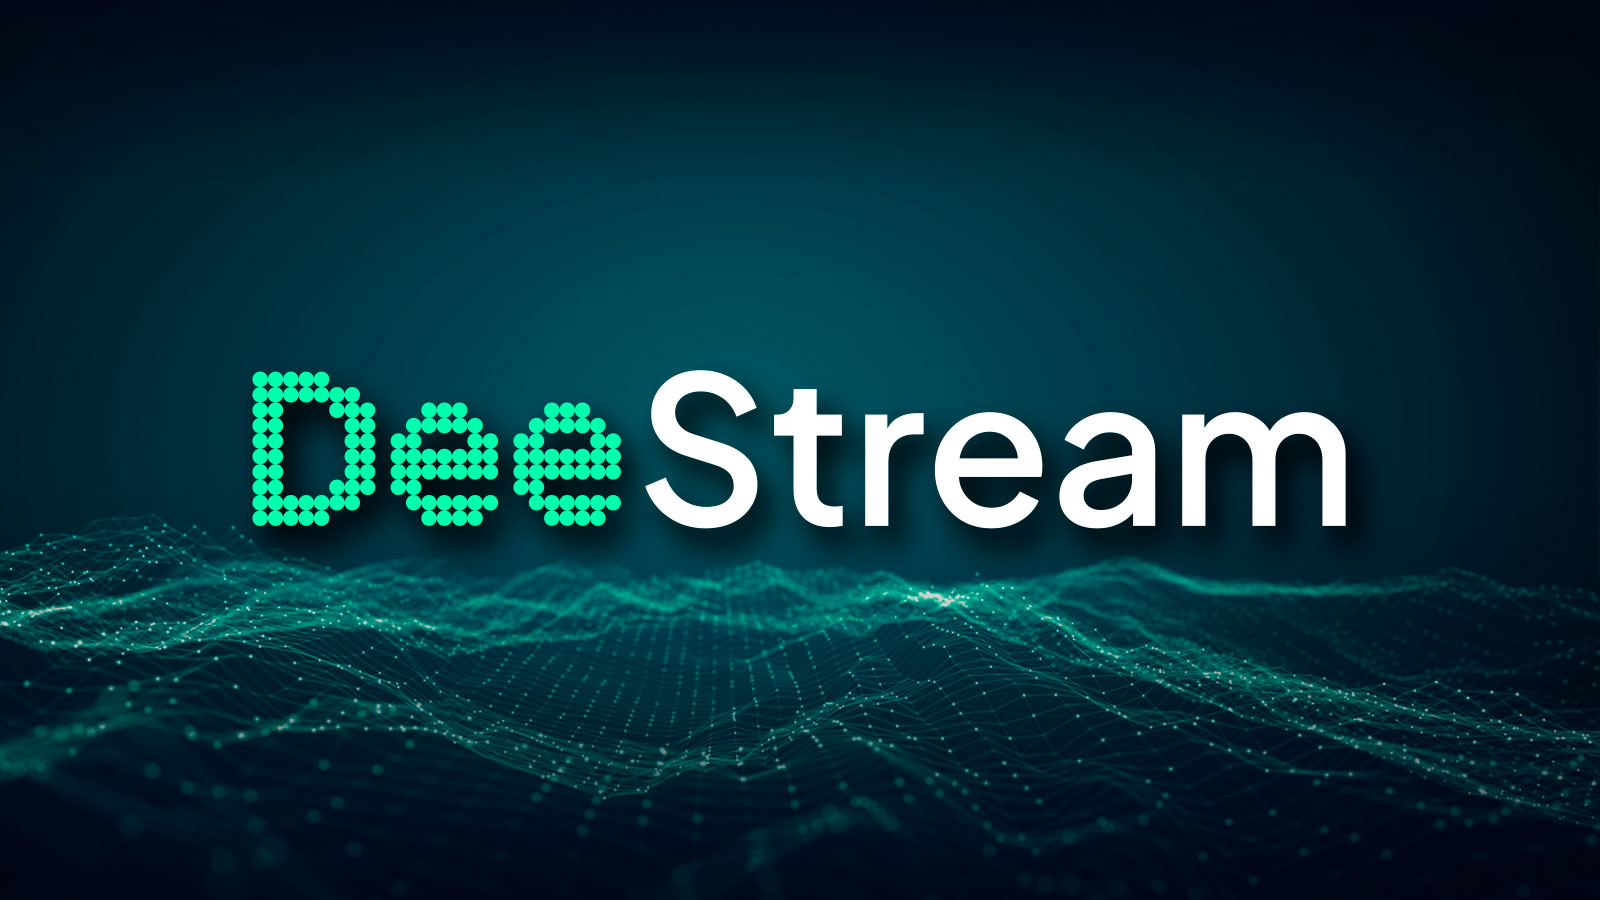 DeeStream (DST) Moves Further in Presale to Build Decentralized Streaming, Binance Coin (BNB) and ORDI (ORDI) Building Foundation For Future